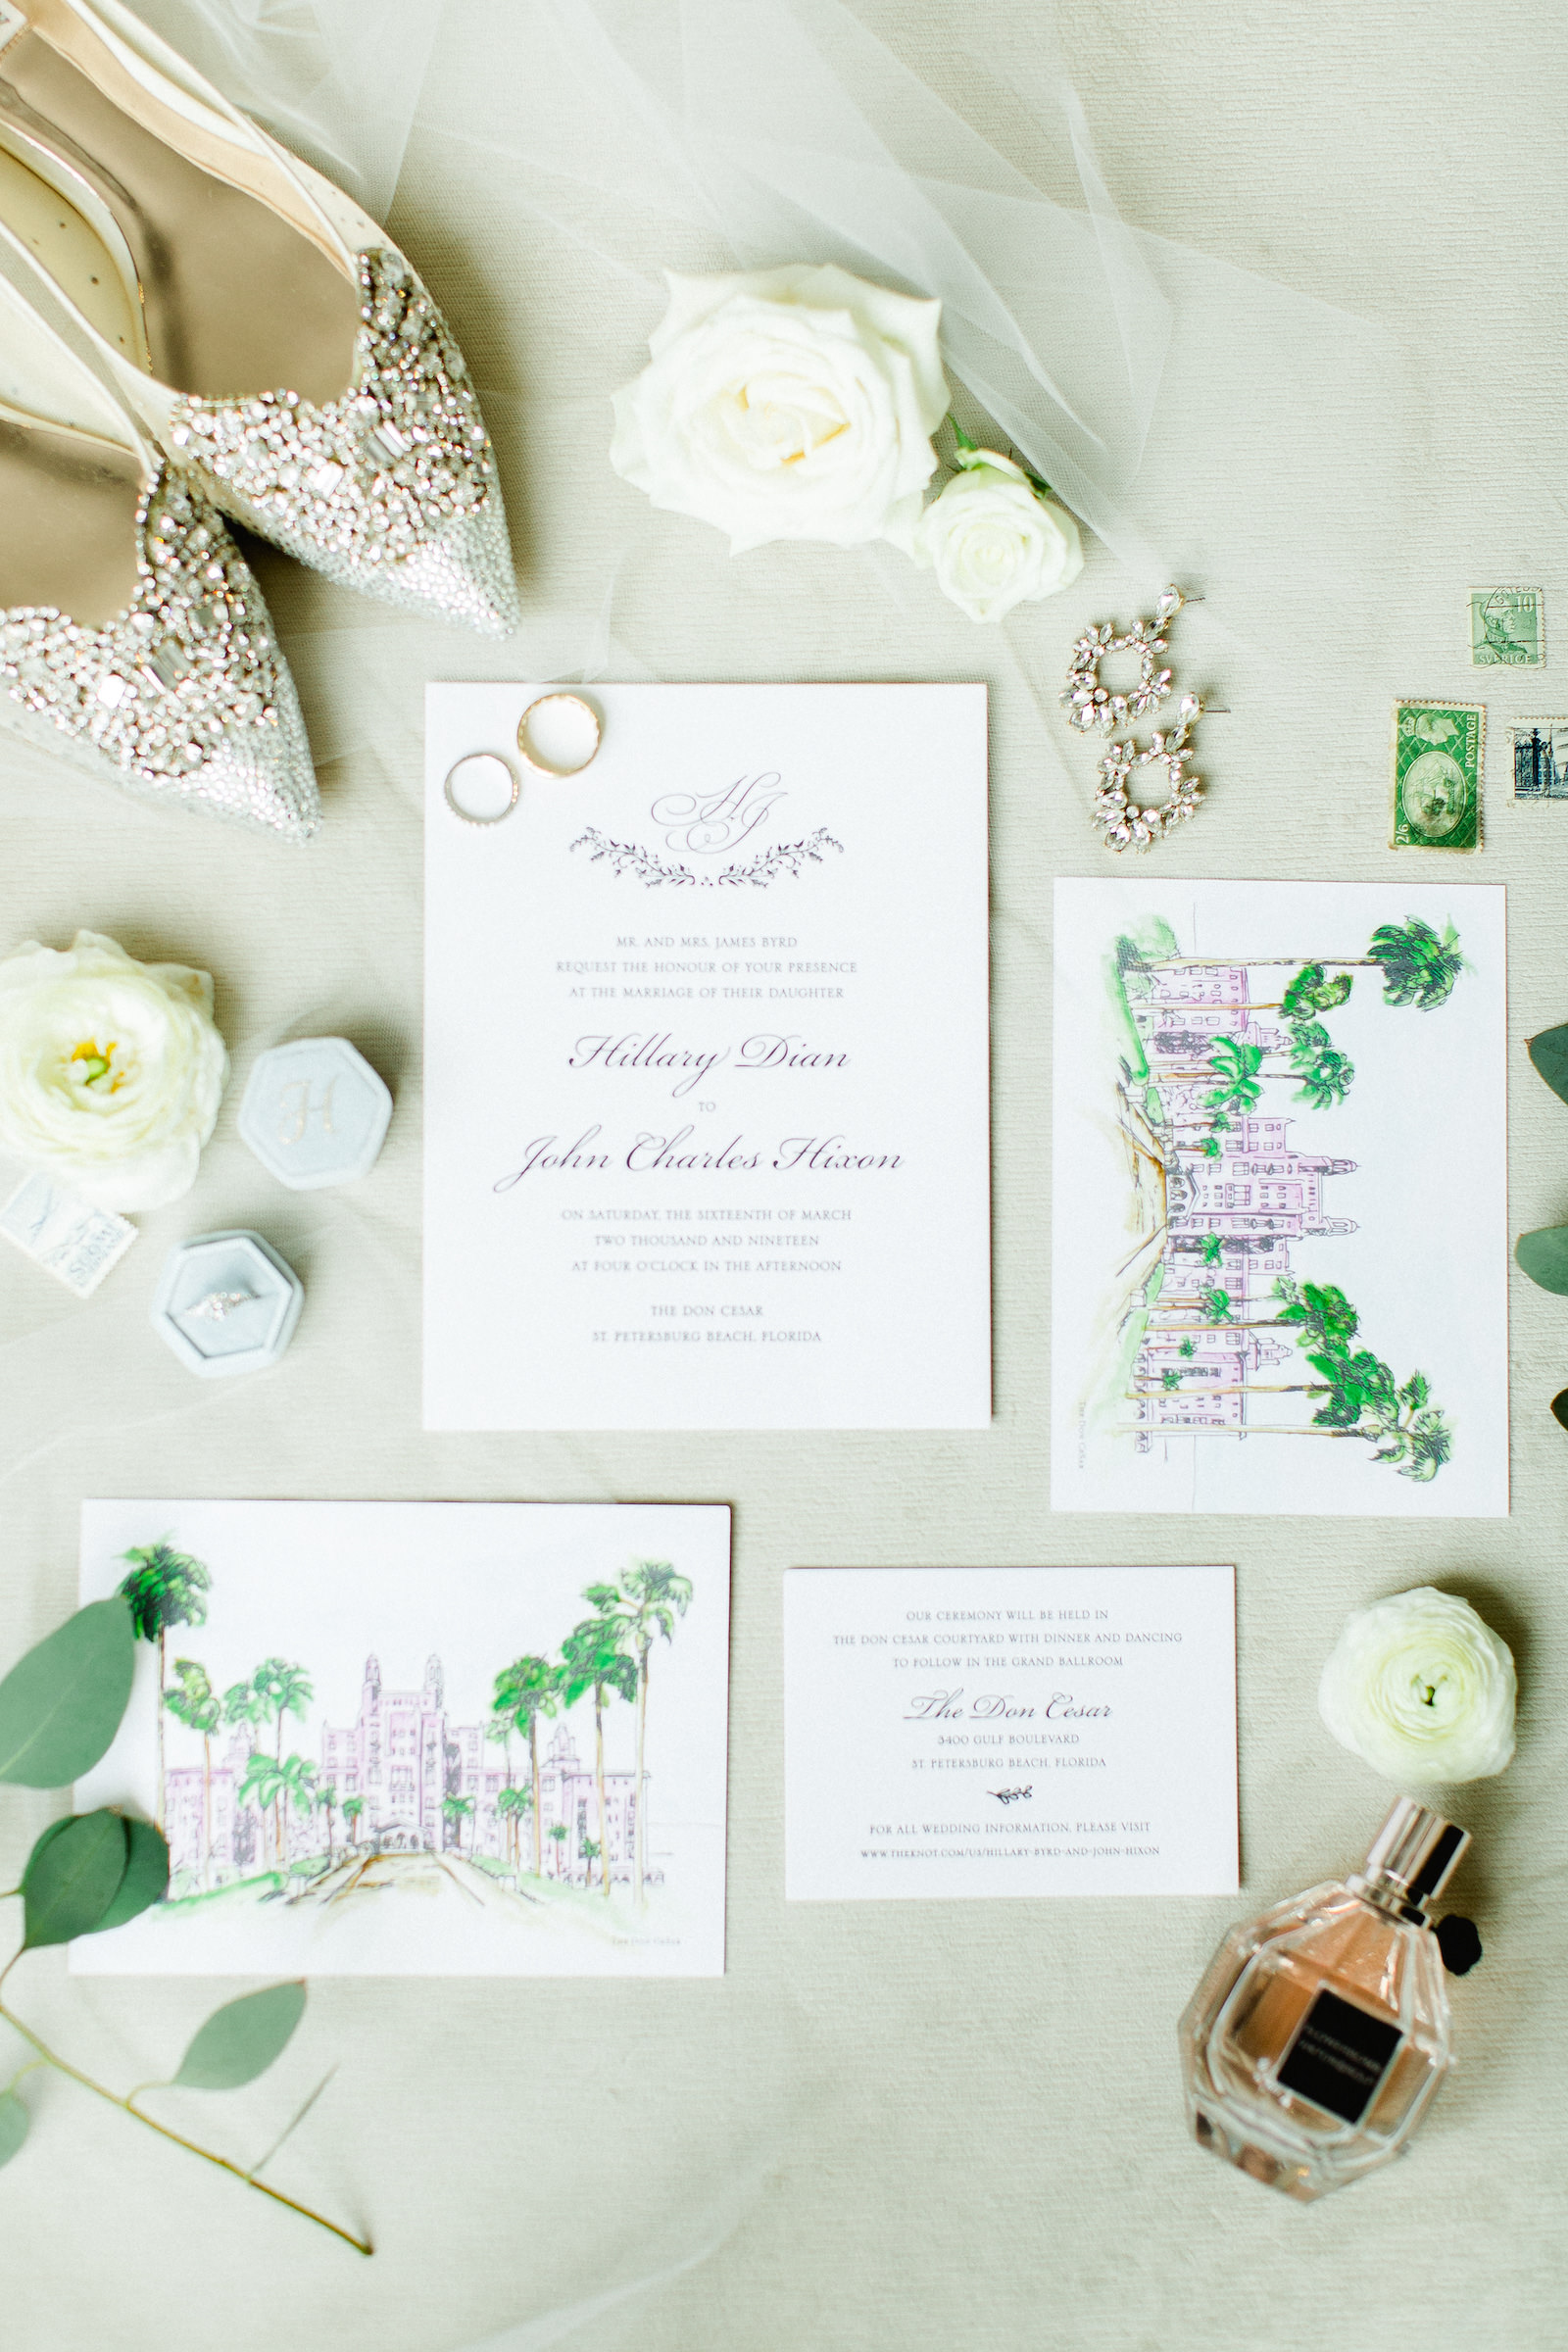 Watercolor Florida Resort Inspired Venue Wedding Invitation Suite | Classic Formal Calligraphy Wedding Stationery Set | Tampa Bay Custom Wedding Save The Date Designer A & P Design Co